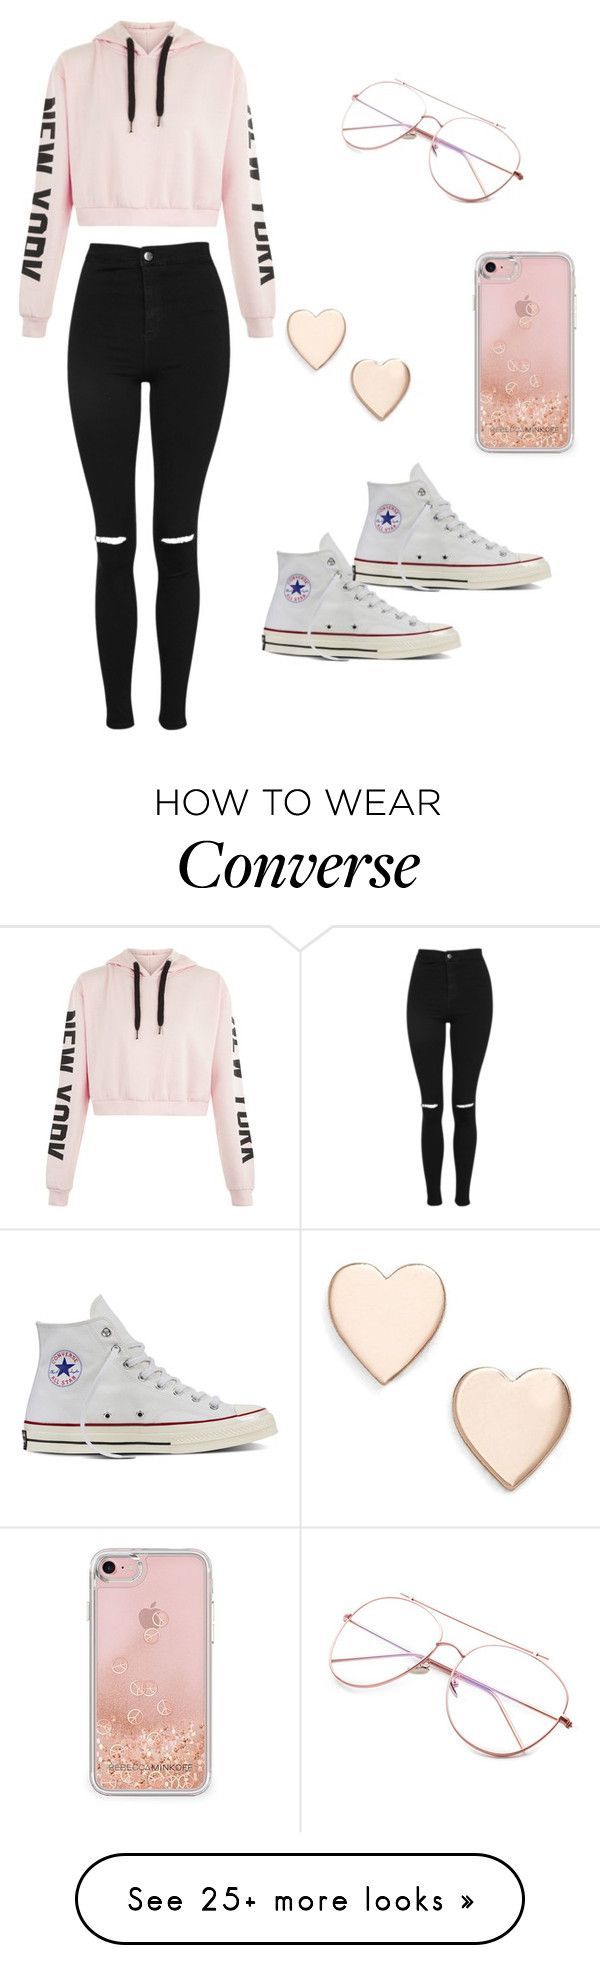 “Uniform” by aarya-tulasi on Polyvore featuring Topshop, Poppy Finch, Rebecca Minkoff and Converse